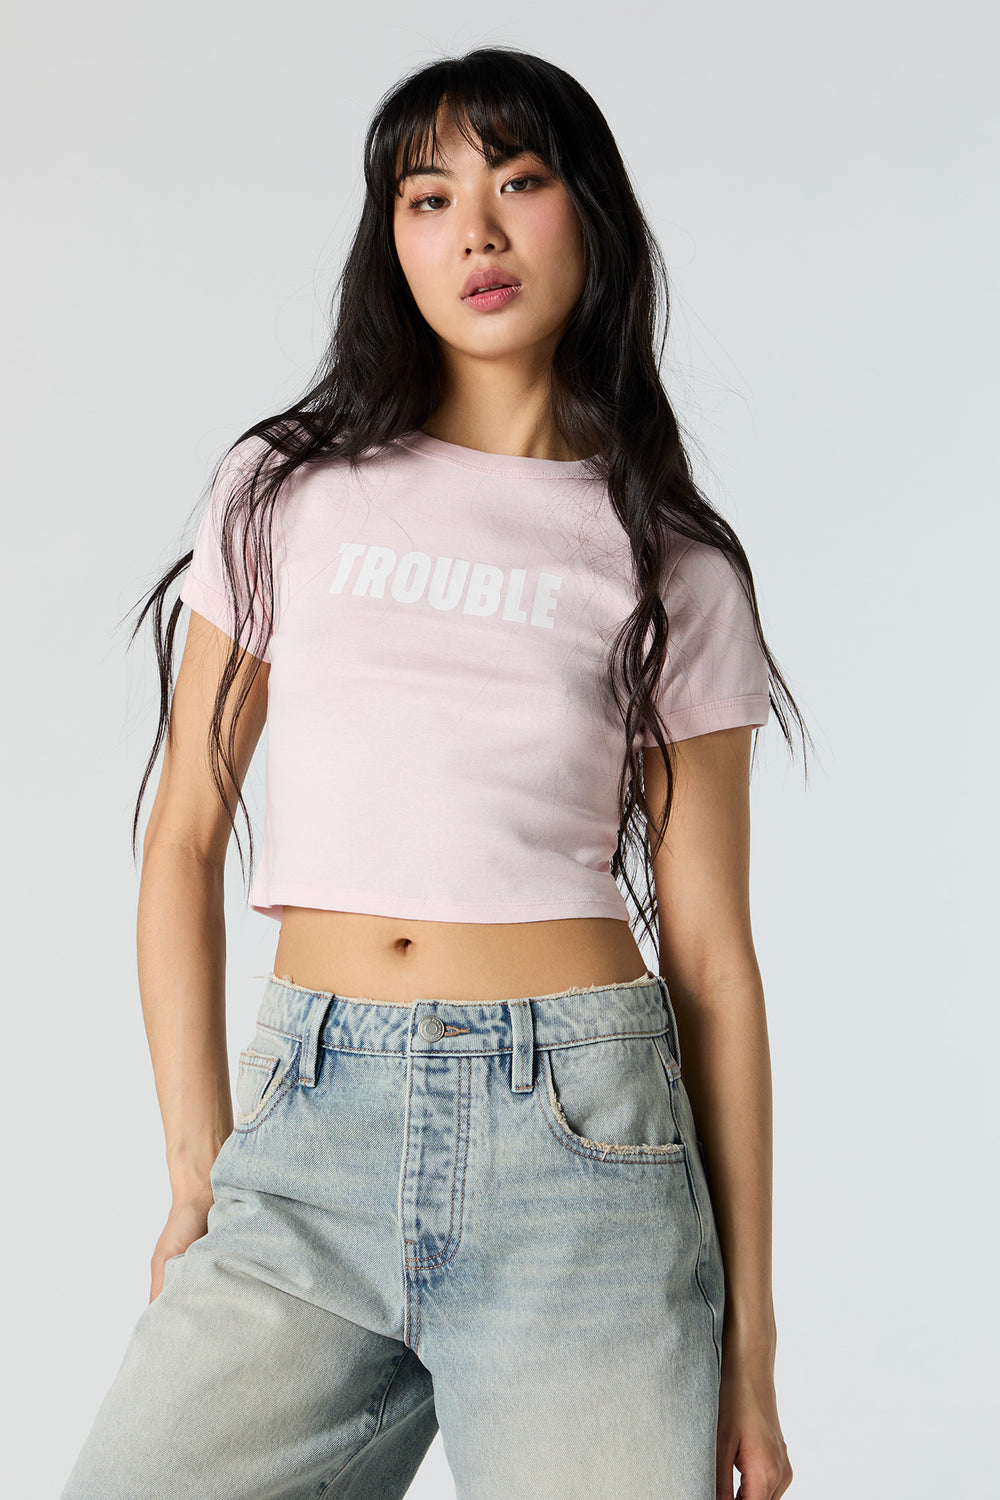 Trouble Graphic Baby T-Shirt Trouble Graphic Baby T-Shirt 4